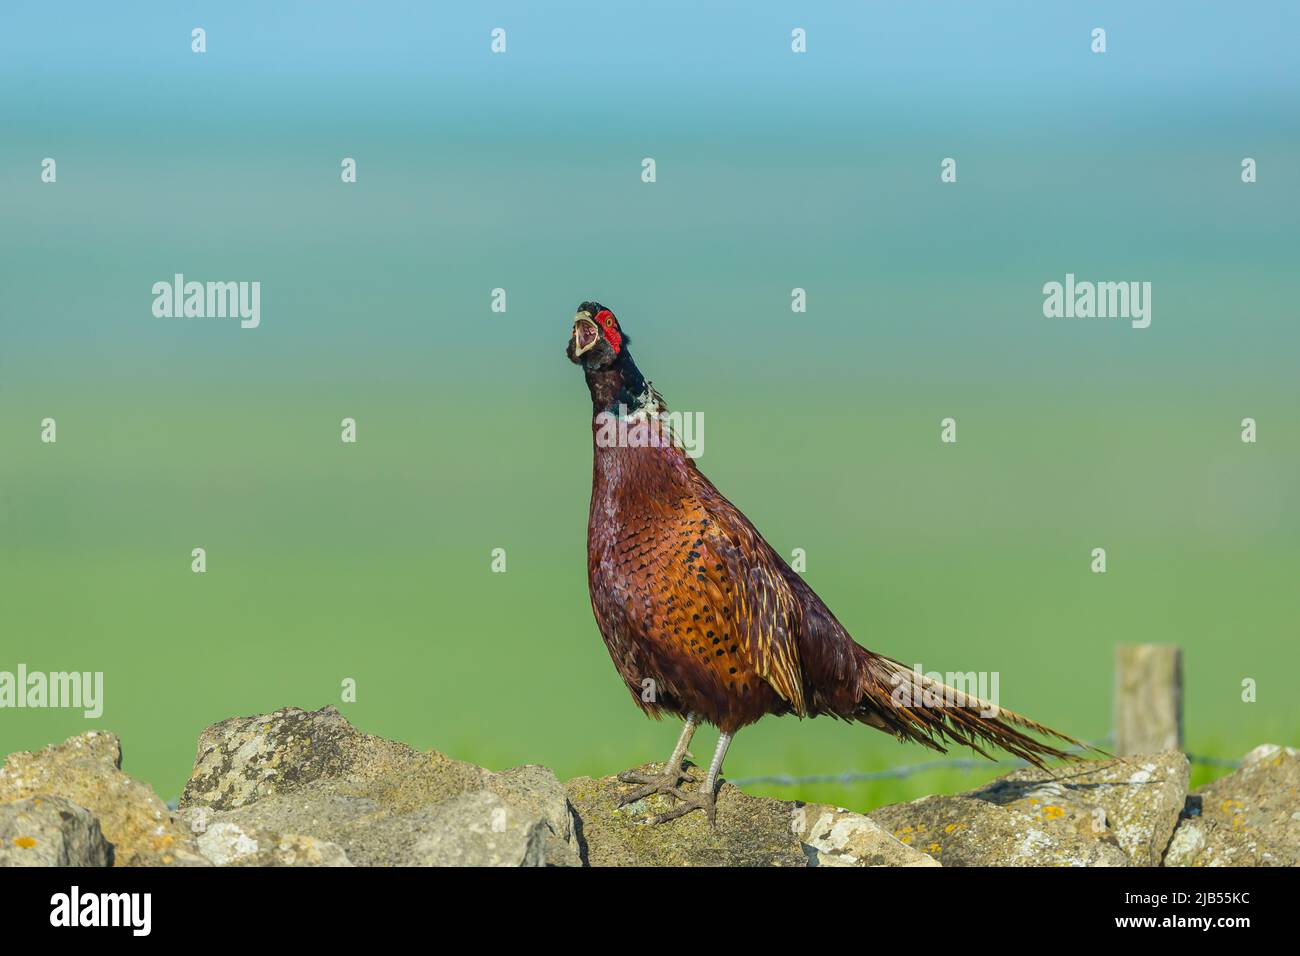 Close-up of a colourful male, ring-necked pheasant in Springtime.  Facing left on drystone walling and calling with his beak wide open. Clean backgrou Stock Photo